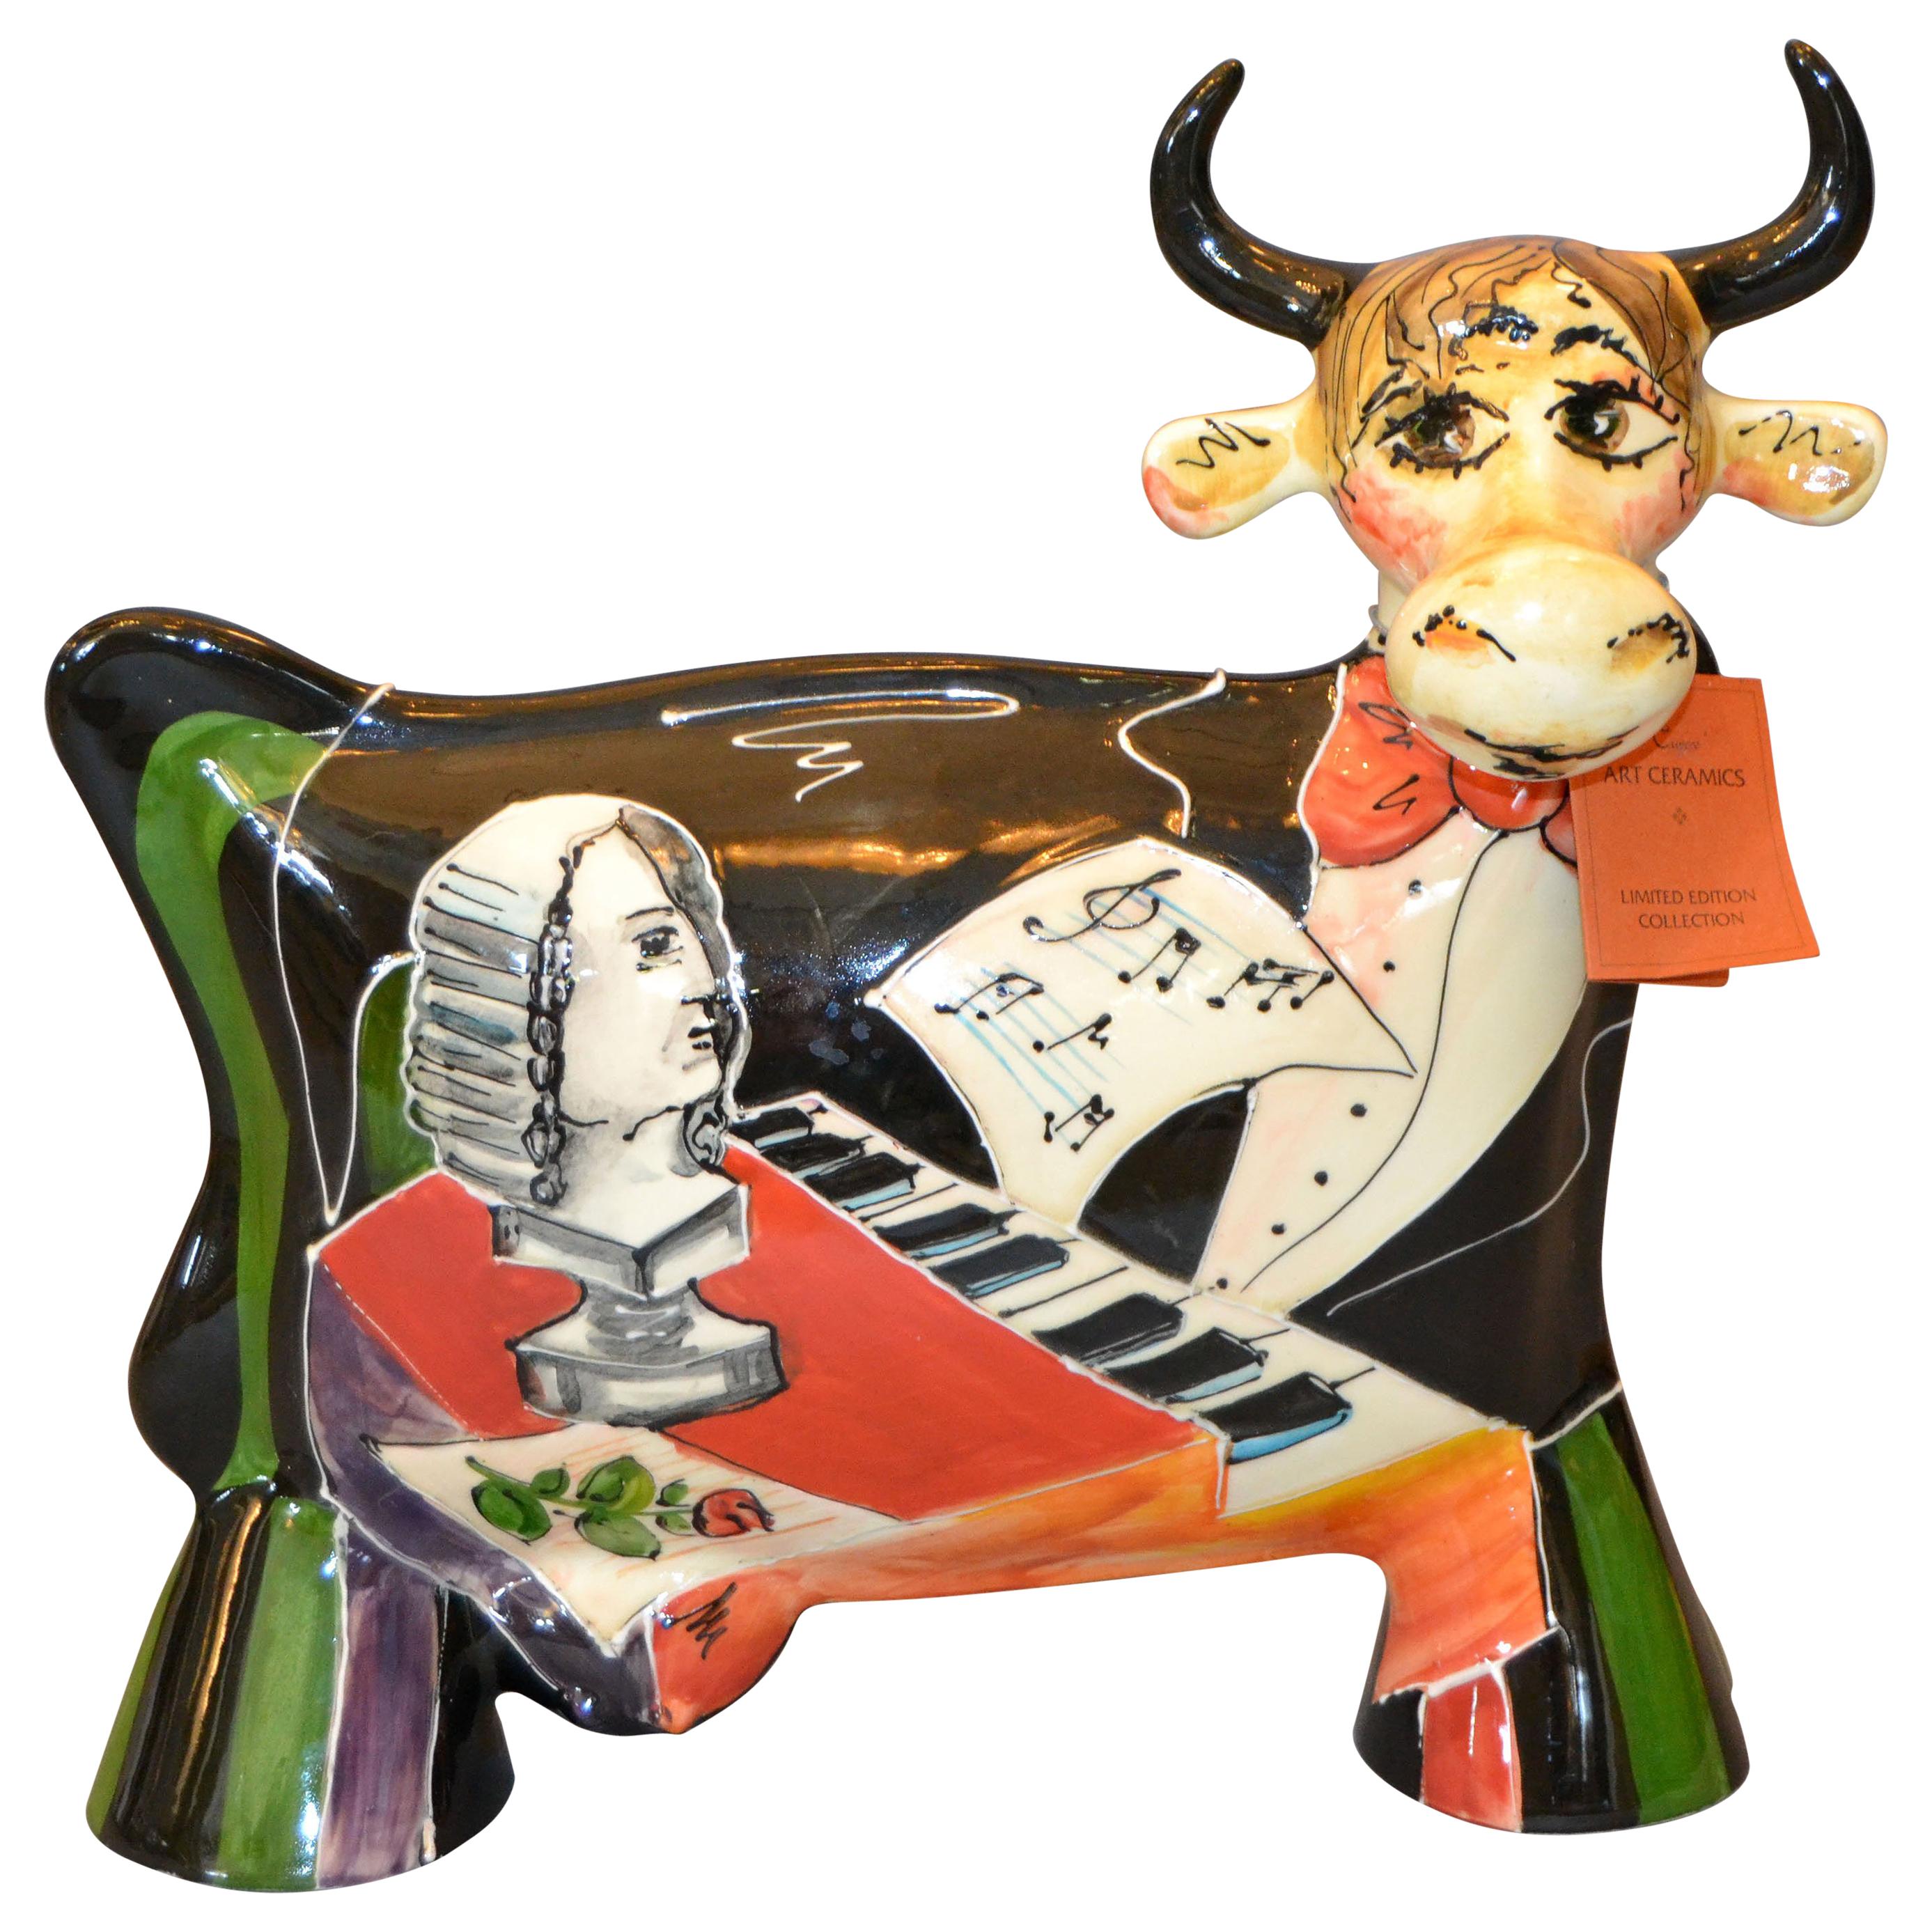 Hand Painted Turov Art Ceramic Cow Figurine, Decorative Collectibles, Russia